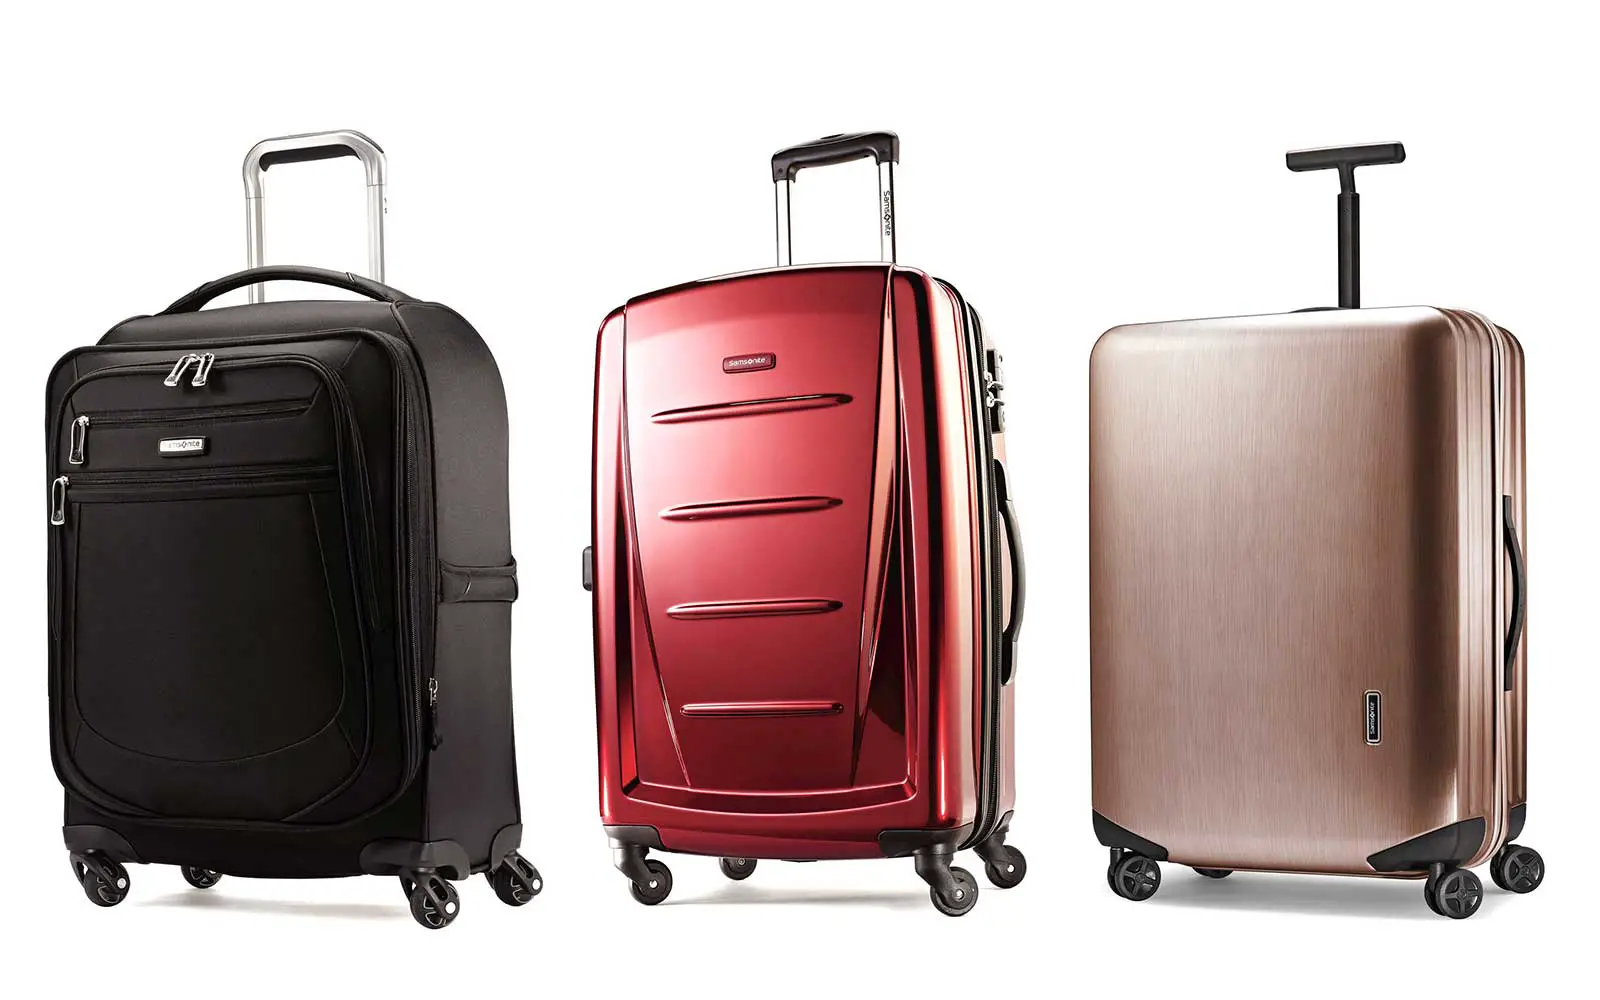  Top Luxury Luggage Brands